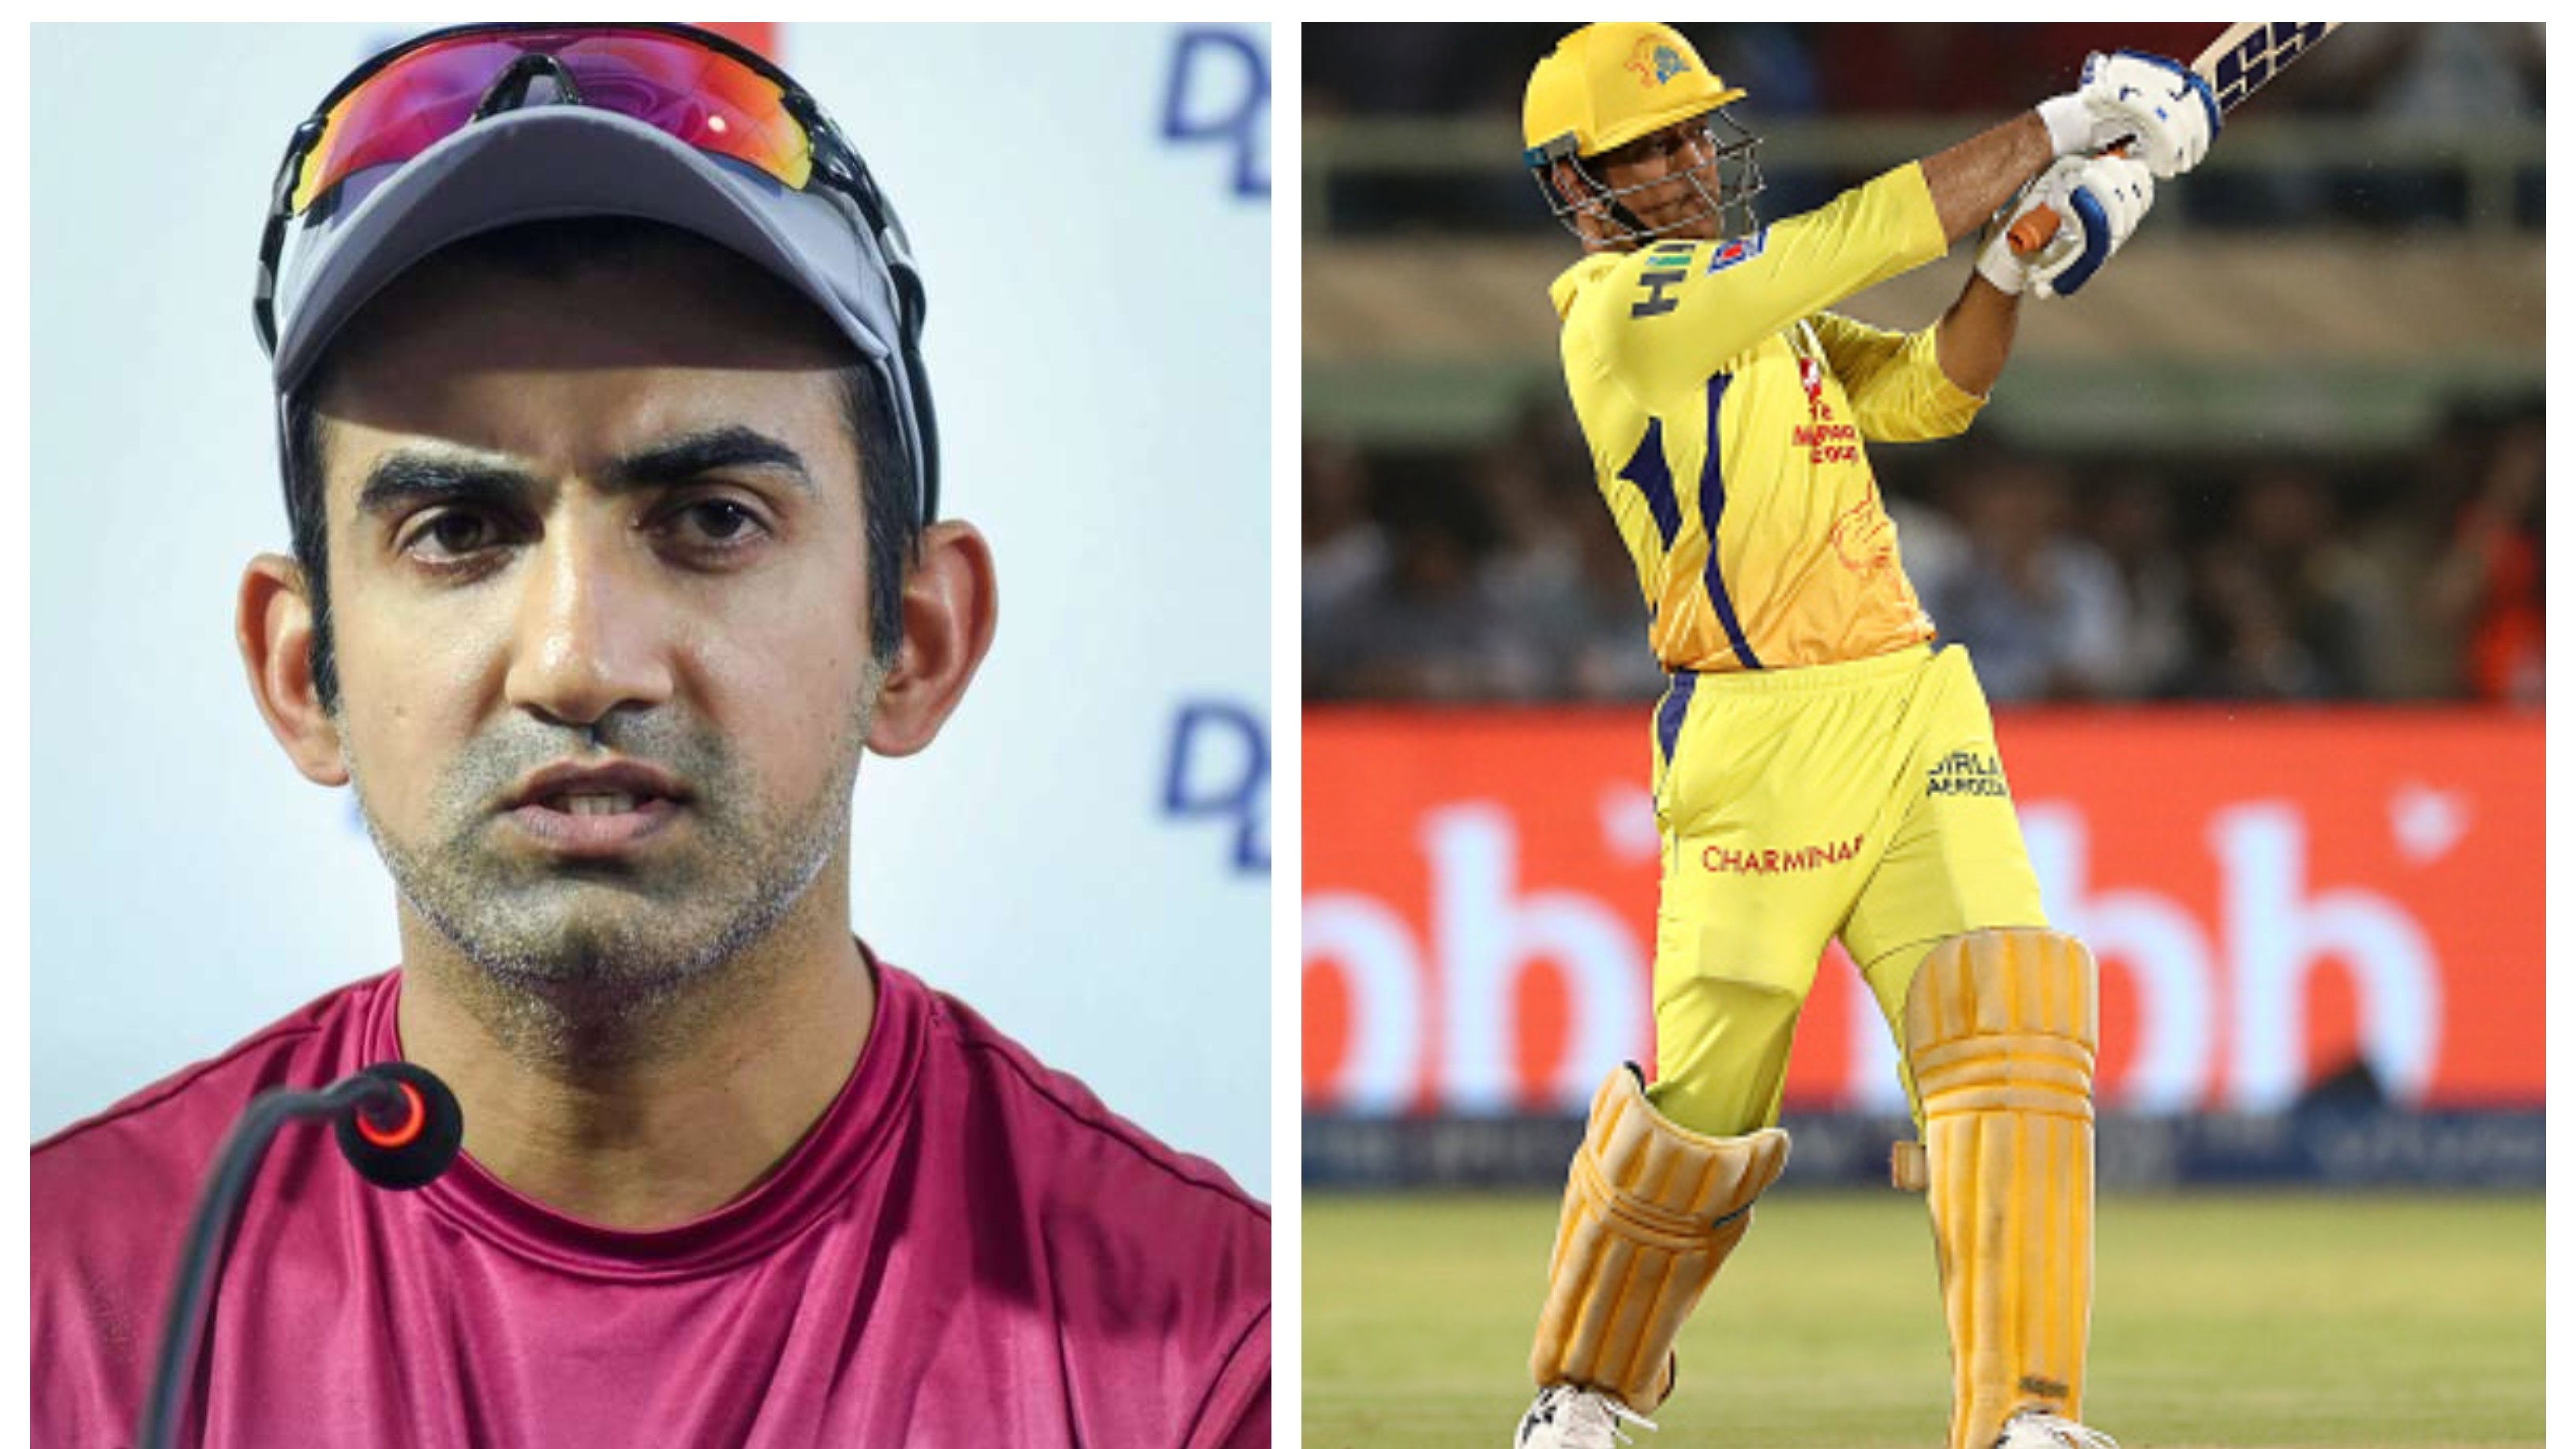 IPL 2020: Gambhir suggests Dhoni to bat at No. 3 in Raina’s absence for CSK